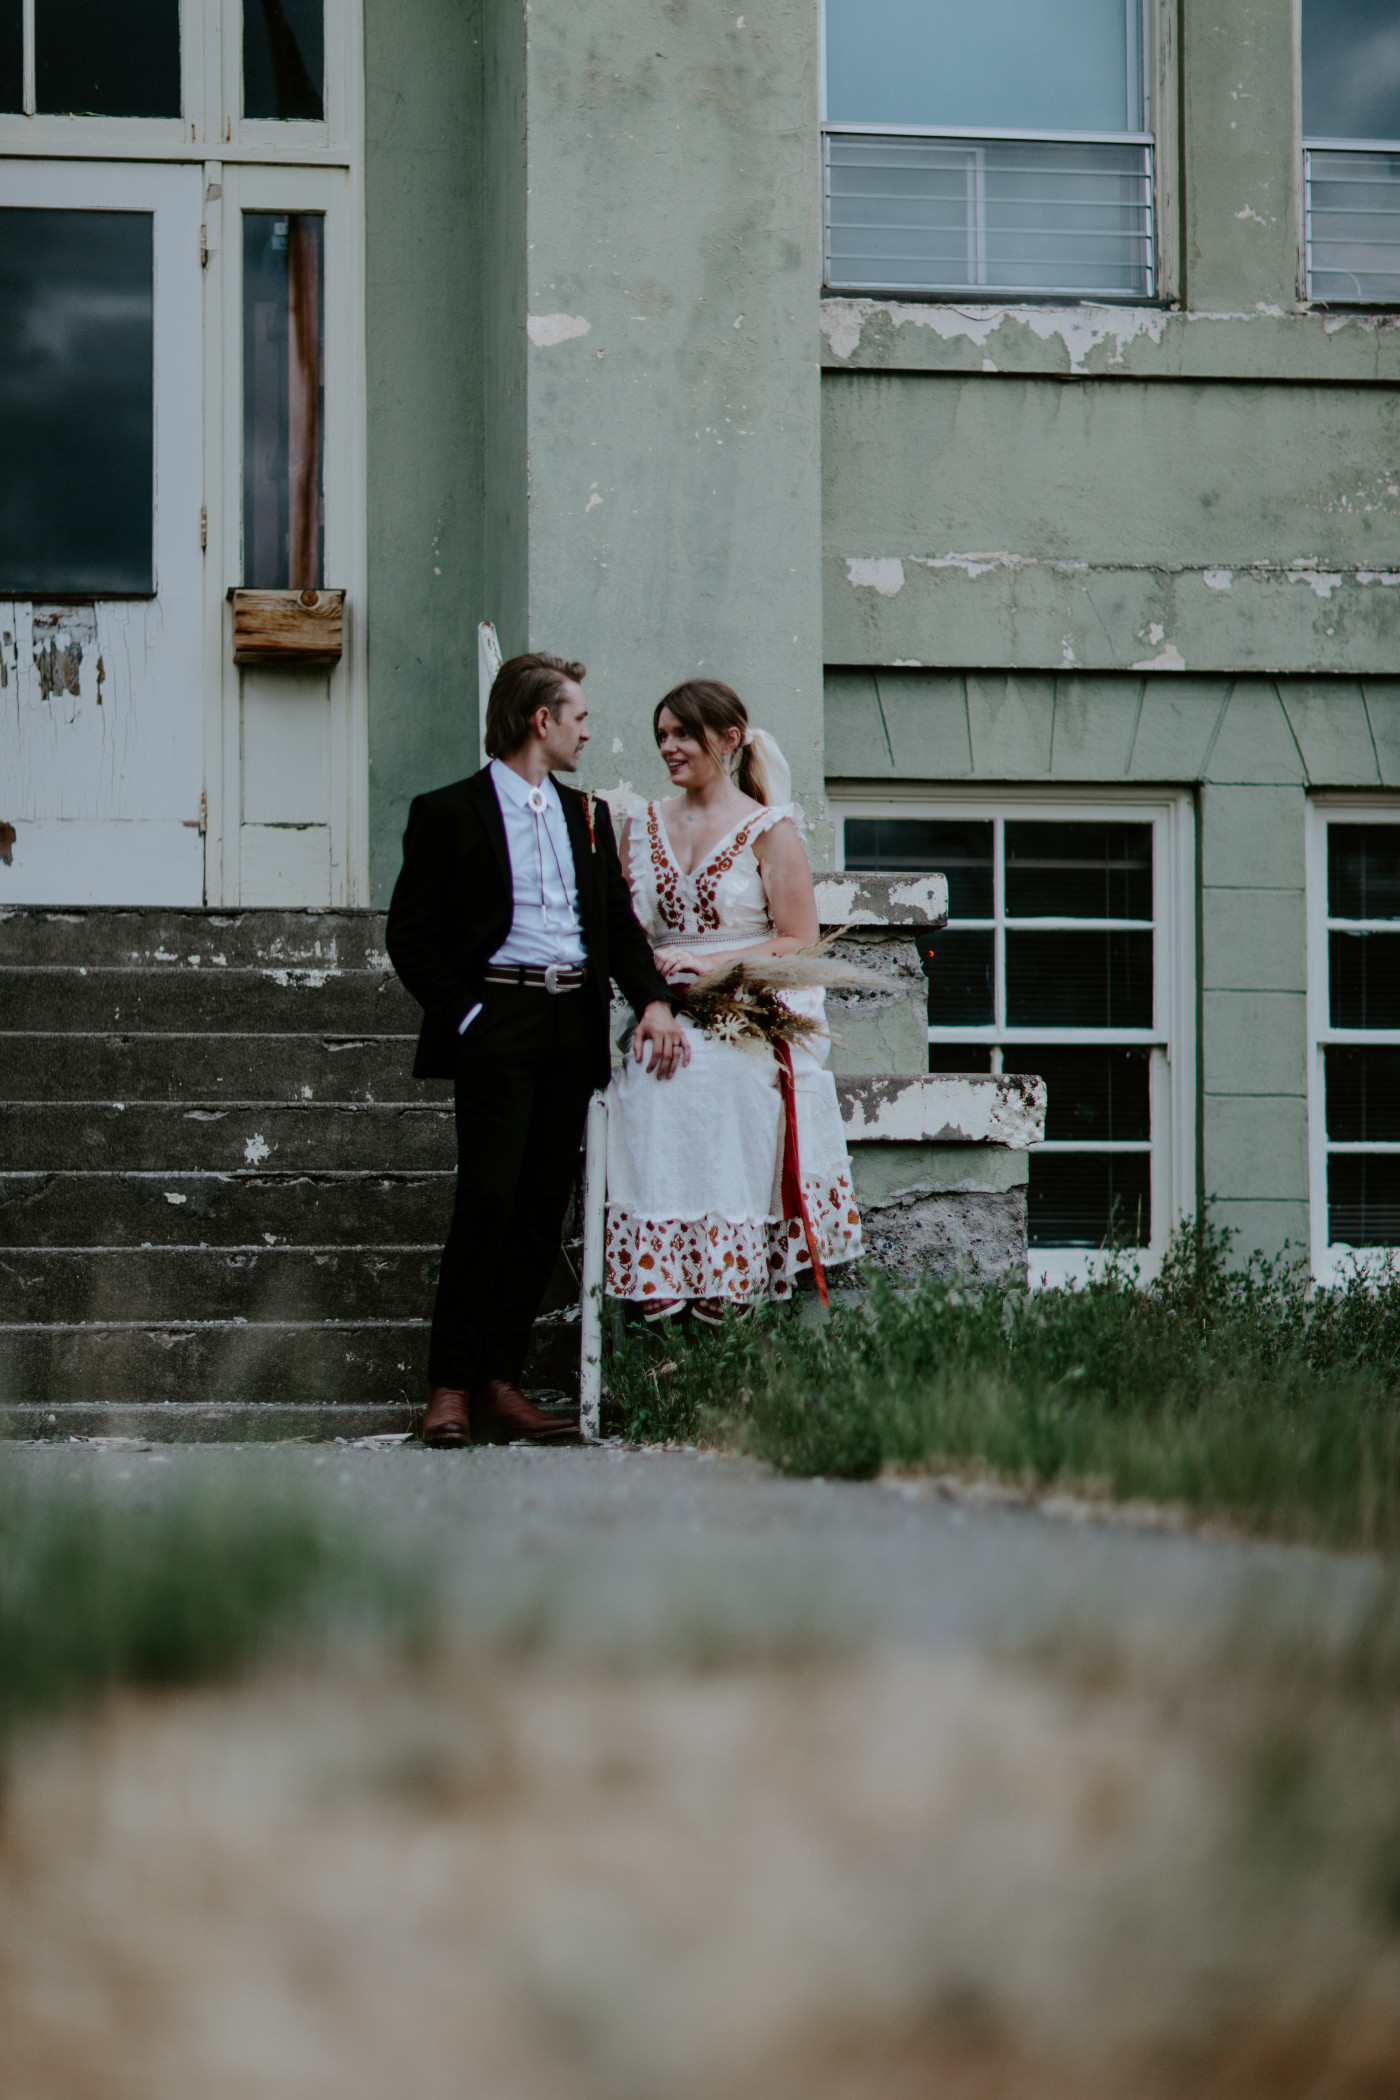 Greyson and Emily in front of an old school house. Elopement photography in the Central Oregon desert by Sienna Plus Josh.